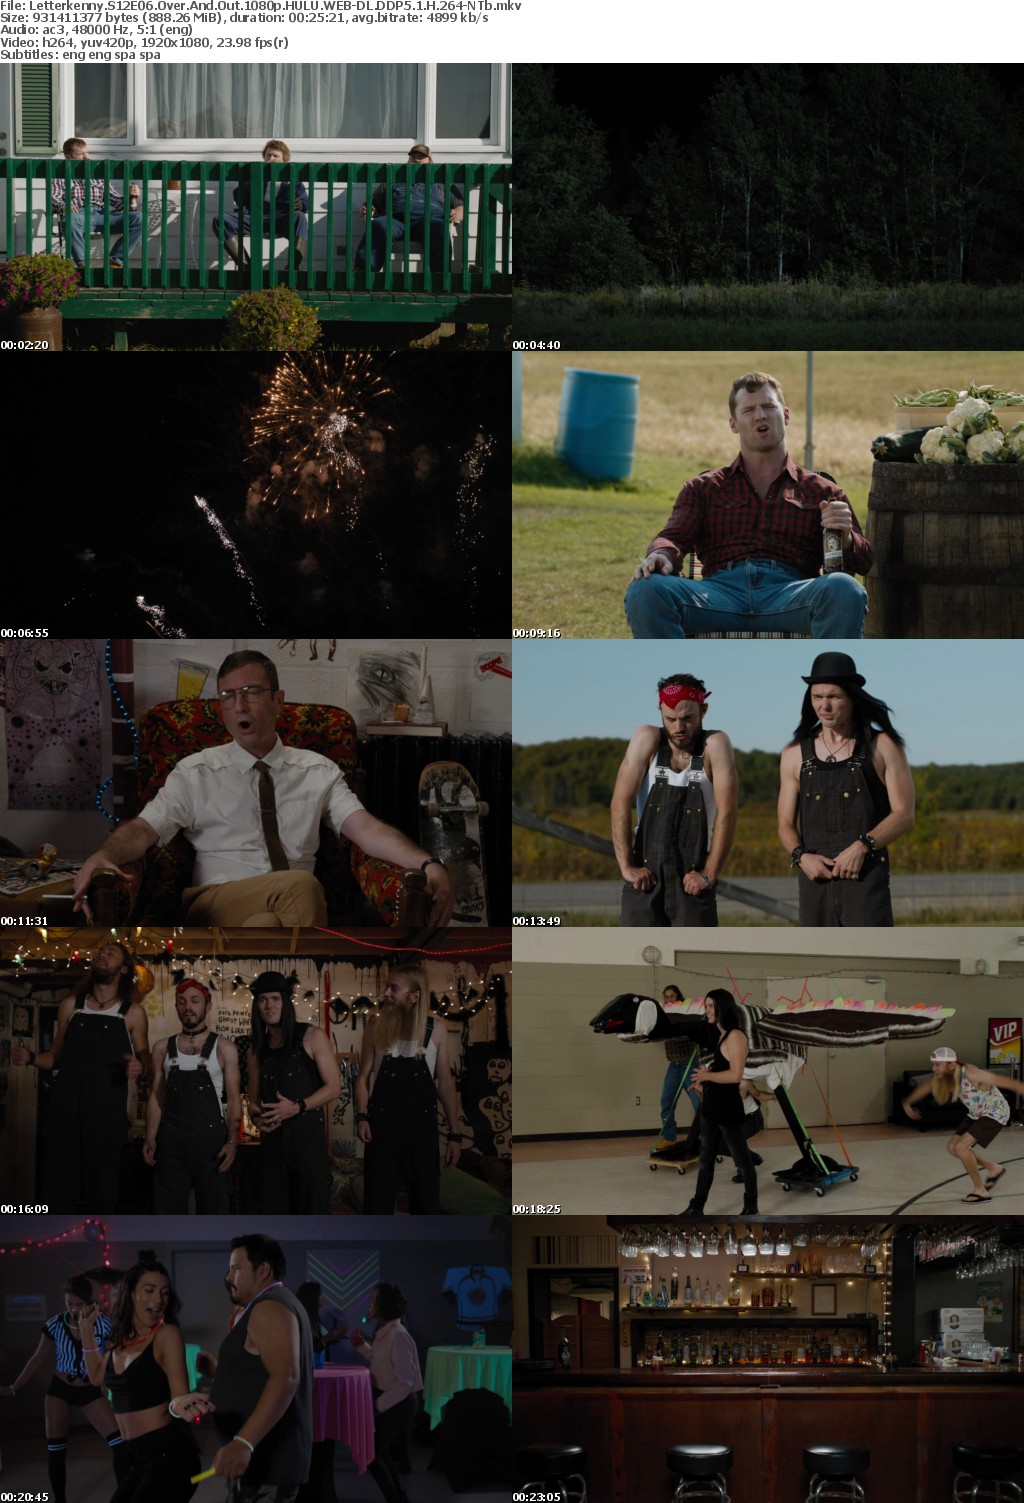 Letterkenny S12E06 Over And Out 1080p HULU WEB-DL DDP5 1 H 264-NTb